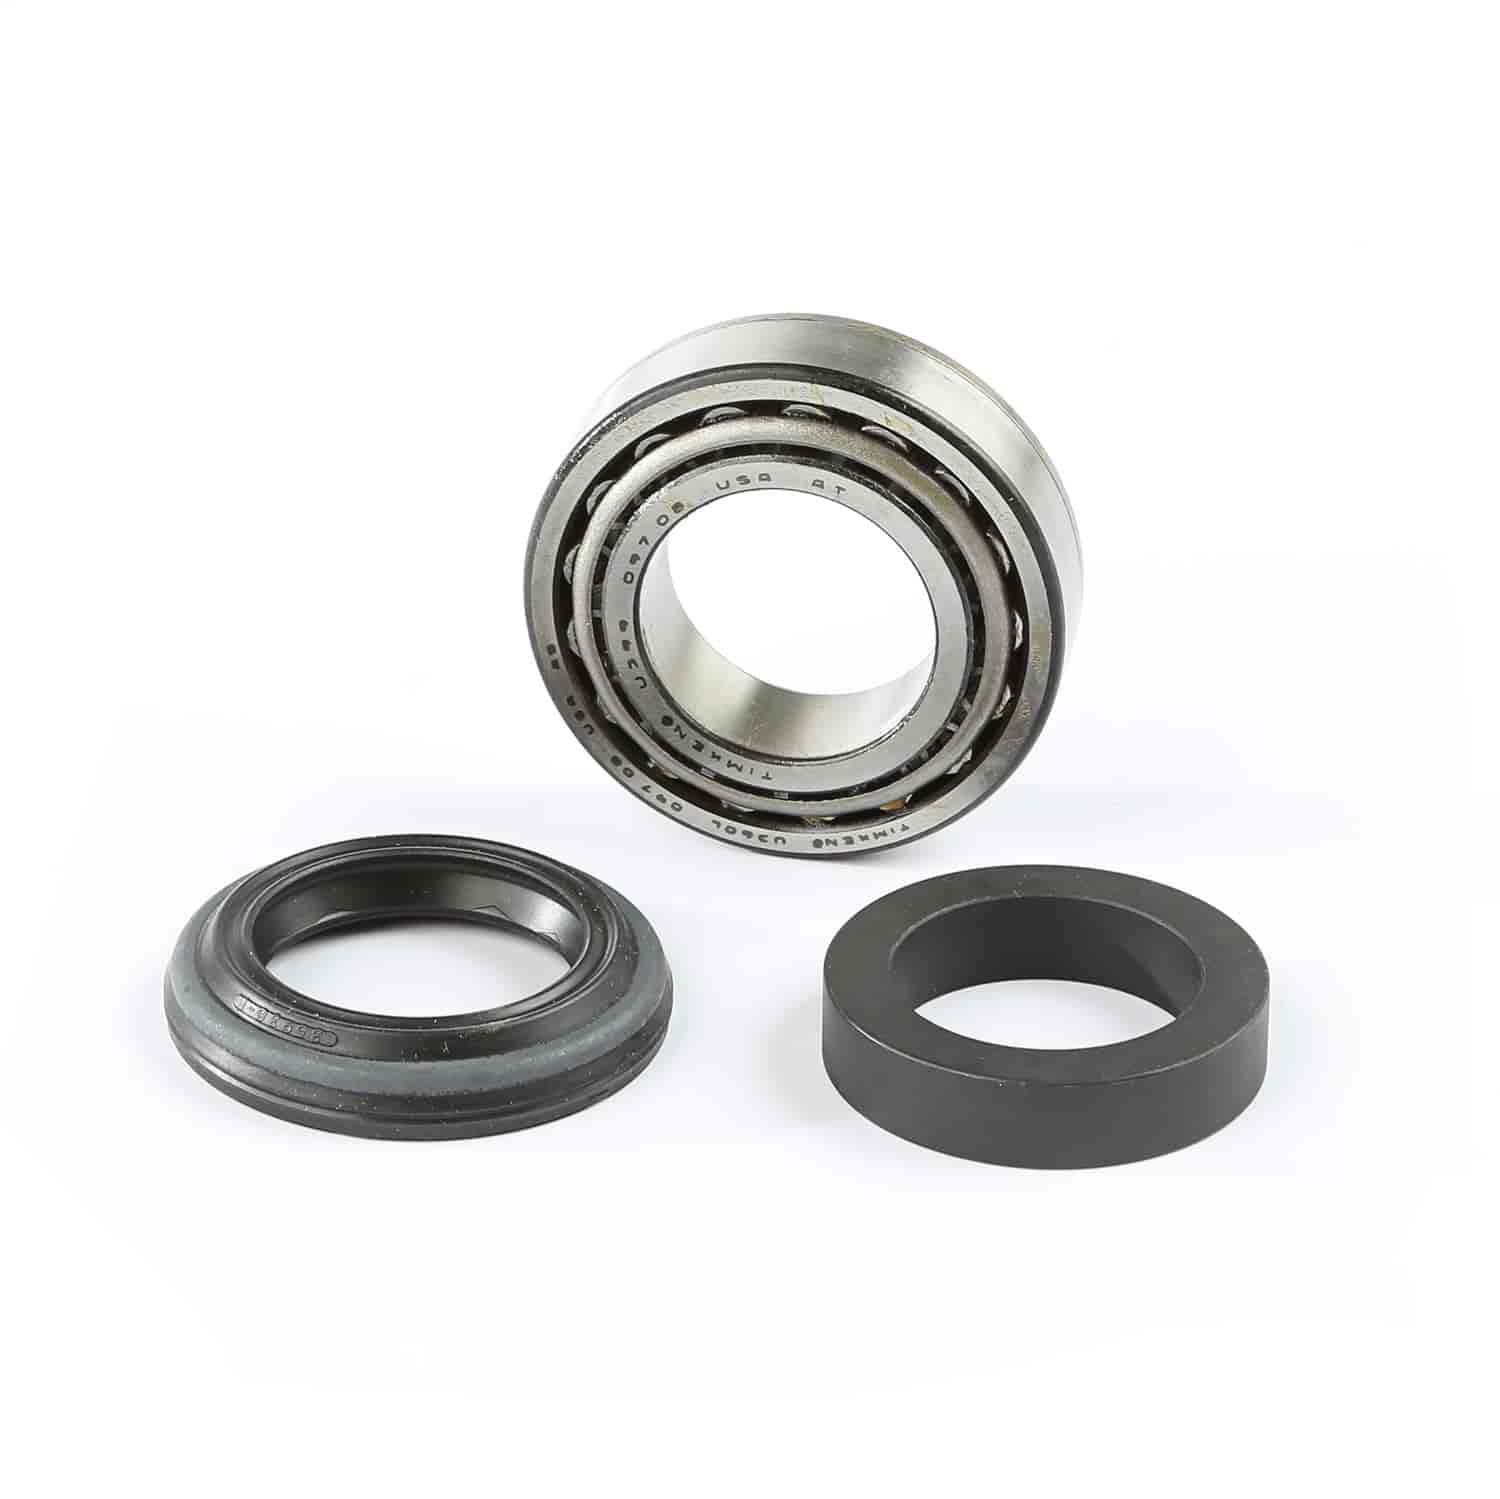 This rear axle shaft bearing kit from Omix-ADA fits 99-04 Jeep Grand Cherokees with Dana 35 and 44 rear axles.